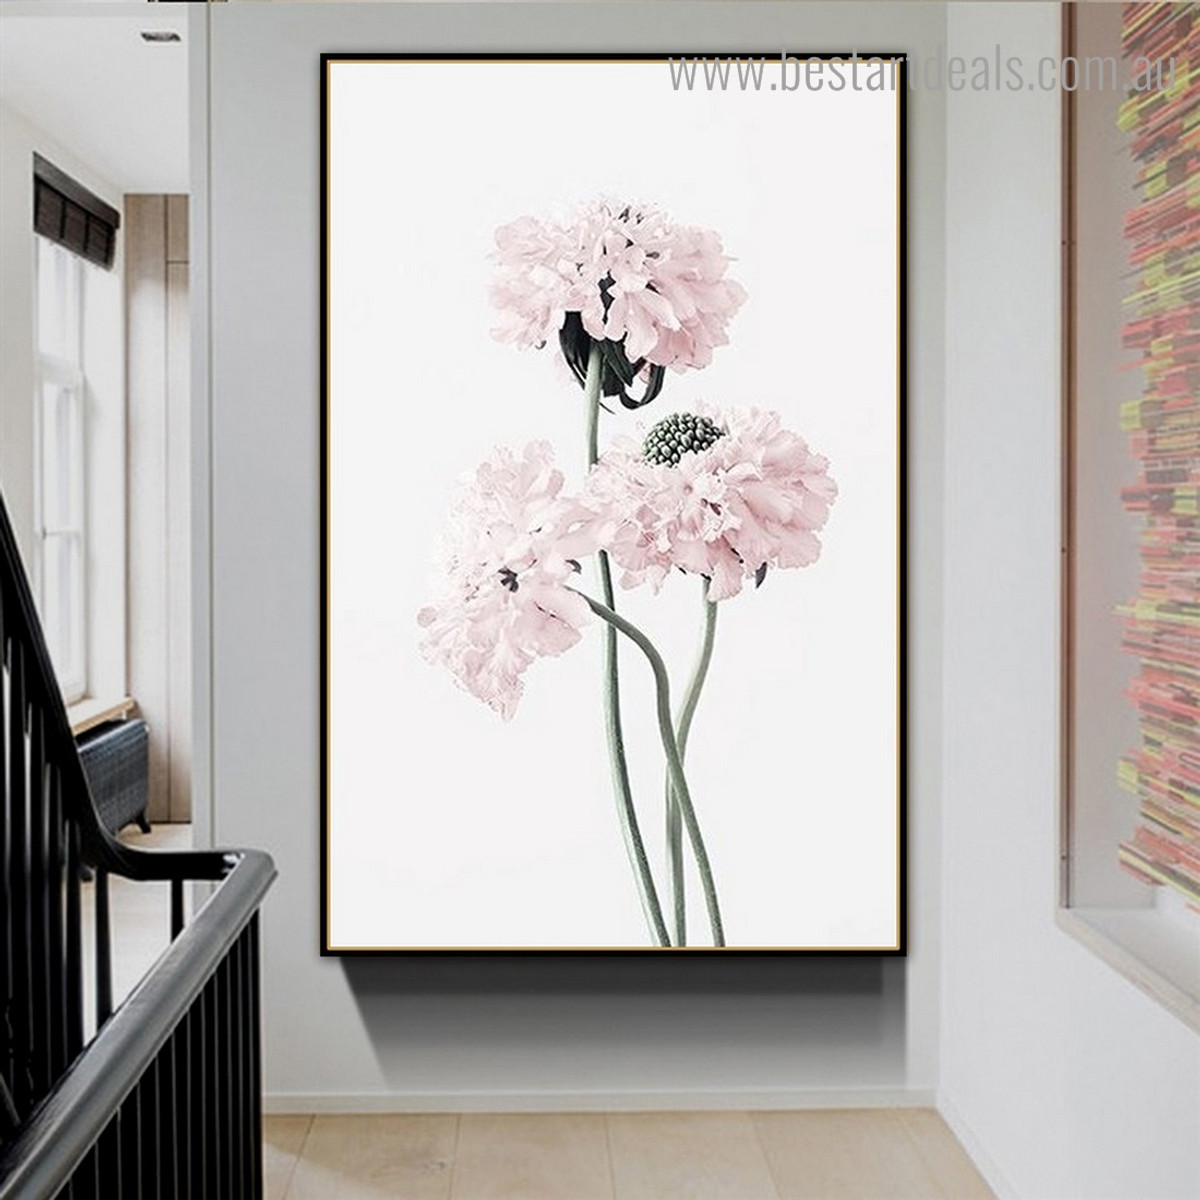 Summery Flowers Floral Contemporary Framed Painting Image Canvas Print for Room Wall Adornment